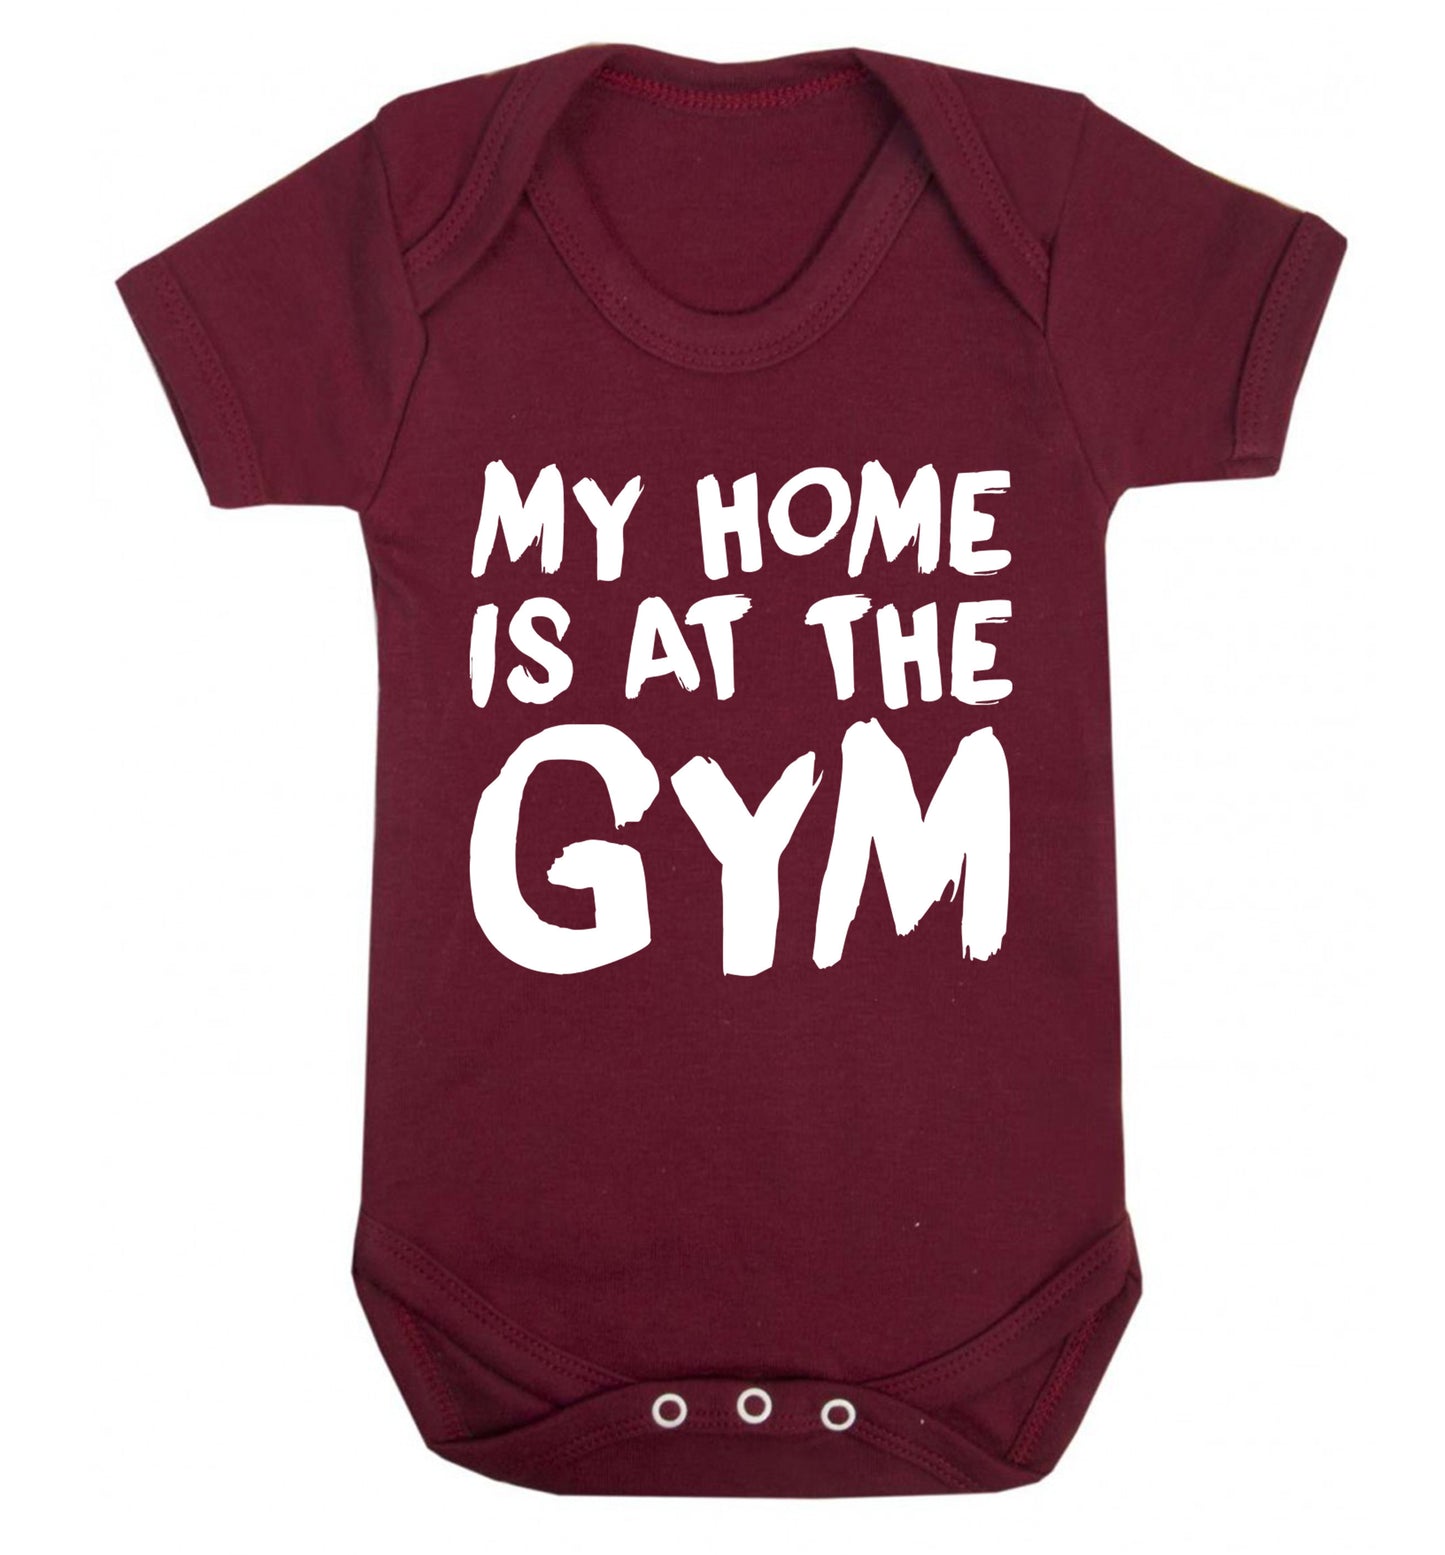 My home is at the gym Baby Vest maroon 18-24 months